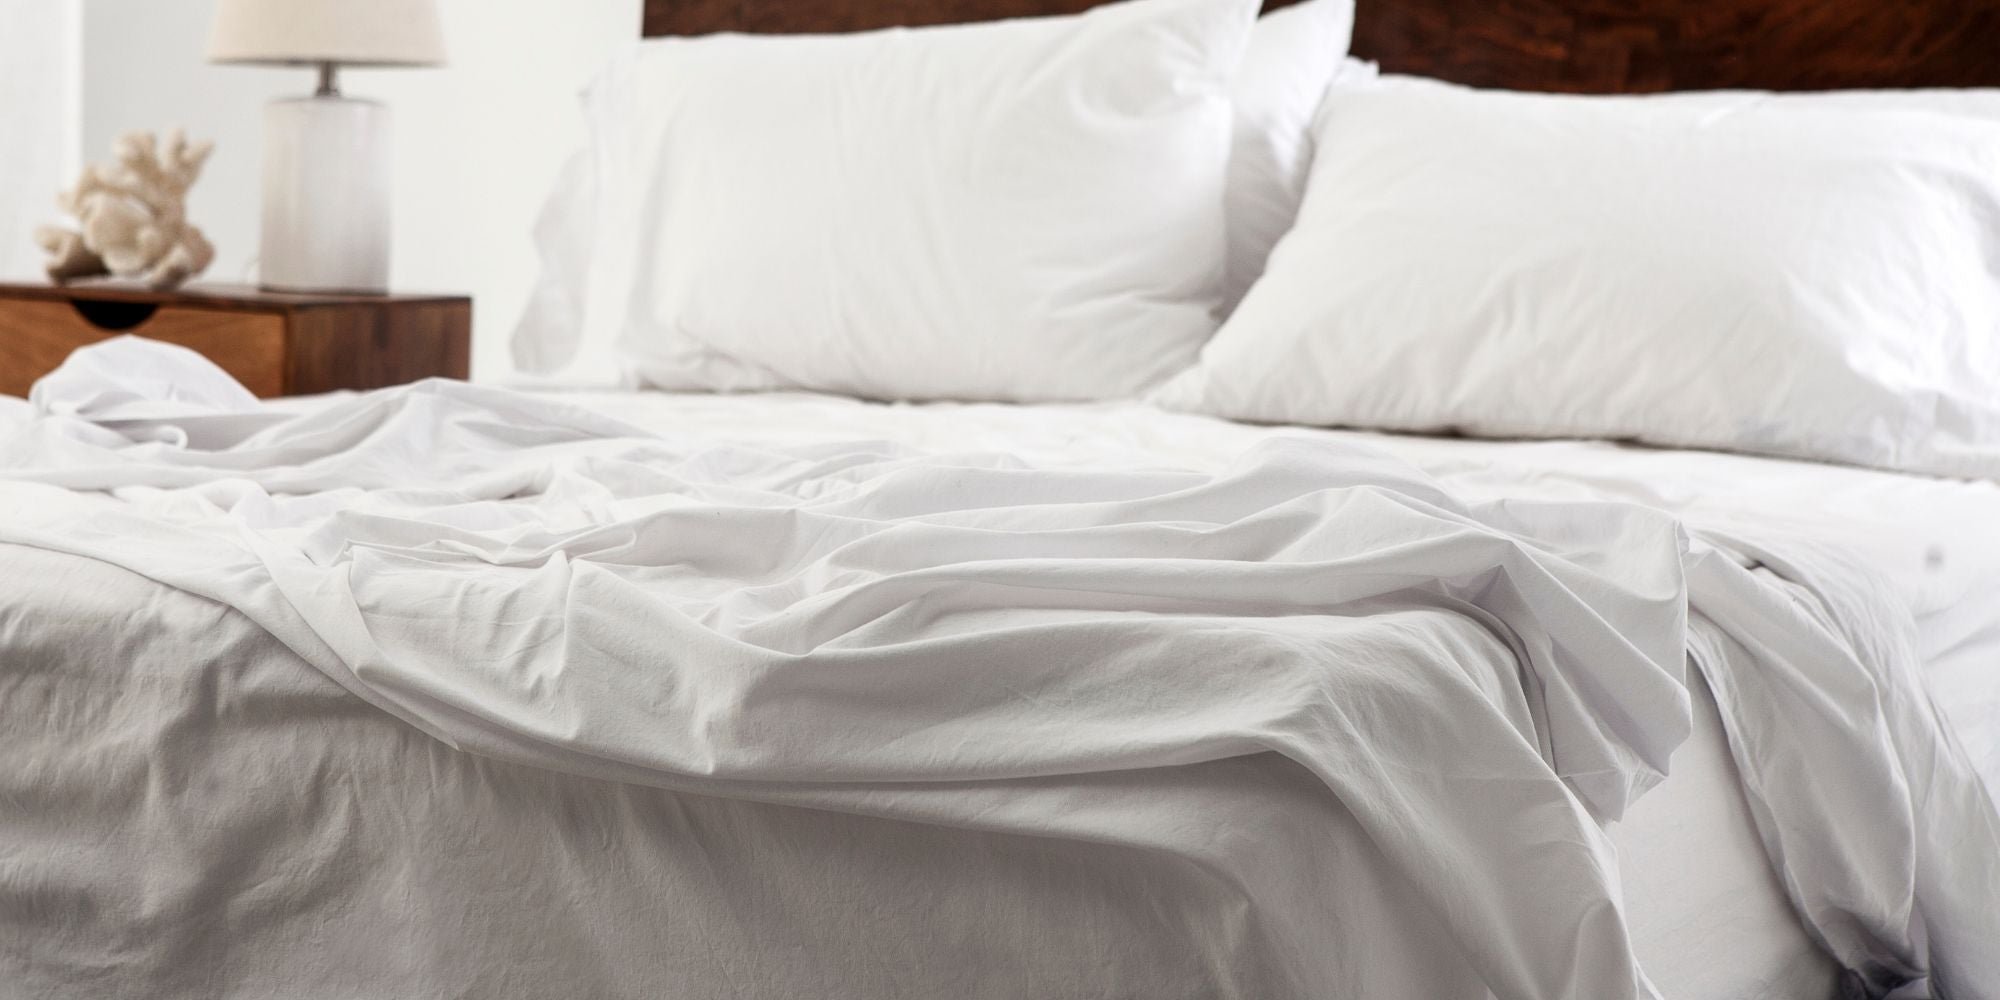 white percale cotton bed sheets on a nicely made bed